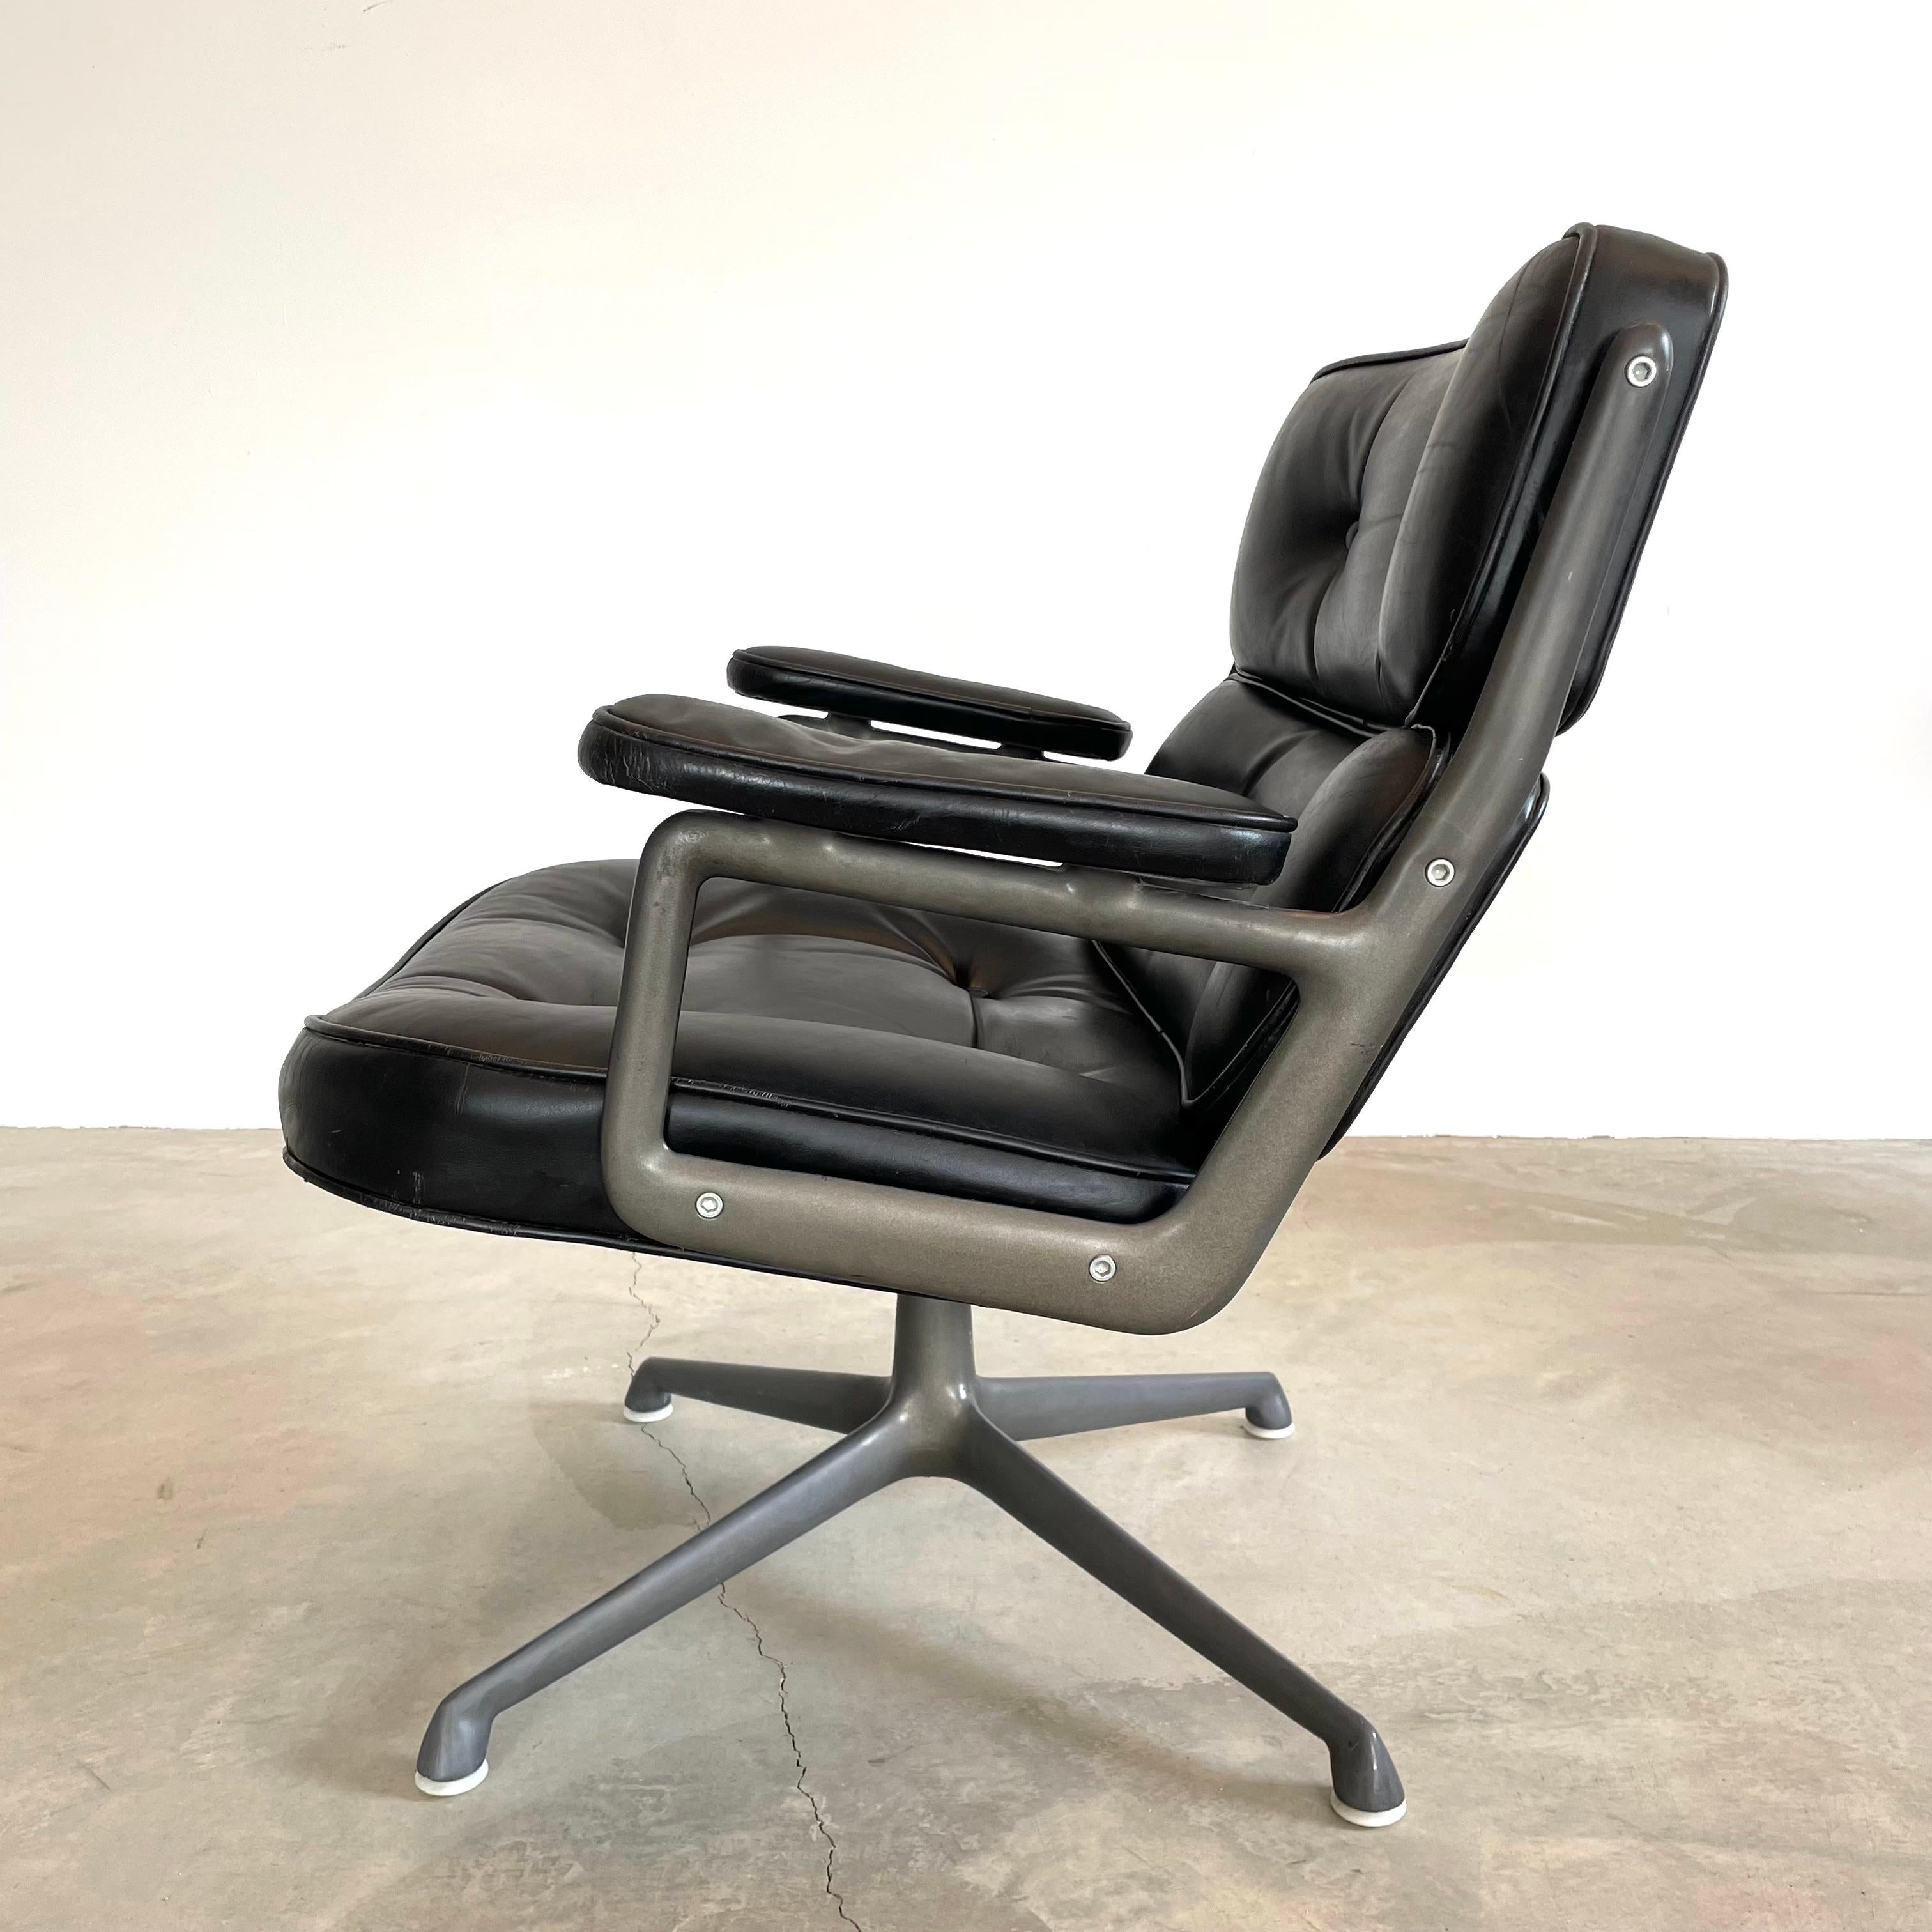 Classic Eames Time Life Lobby Chair in black leather for Herman Miller. Black leather is in good condition with wear as shown. Extremely comfortable and worn in. Chair swivels. Height is adjustable. Fantastic patina to metal and leather. The perfect